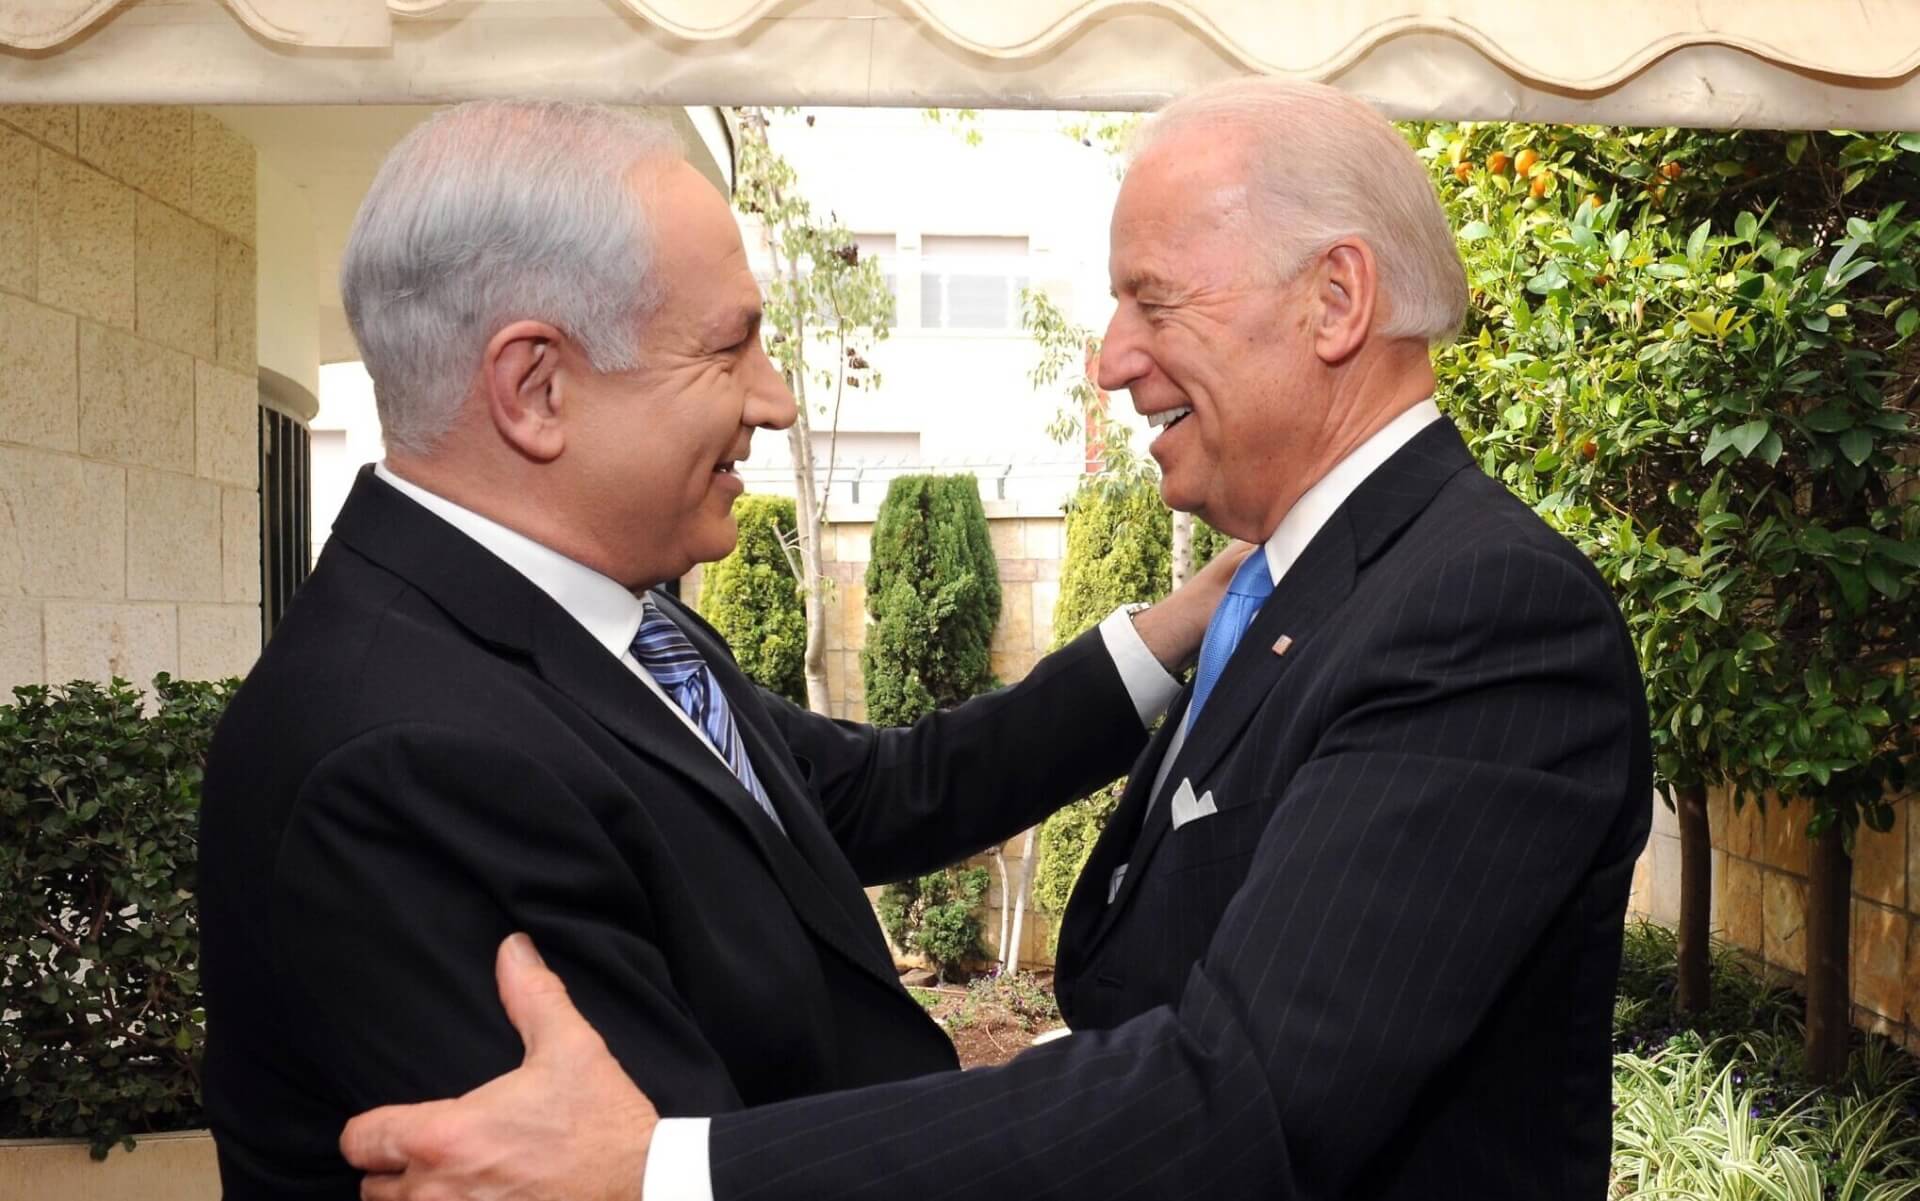 What Will a Joe Biden Presidency Mean for the Israel-Palestine Conflict?